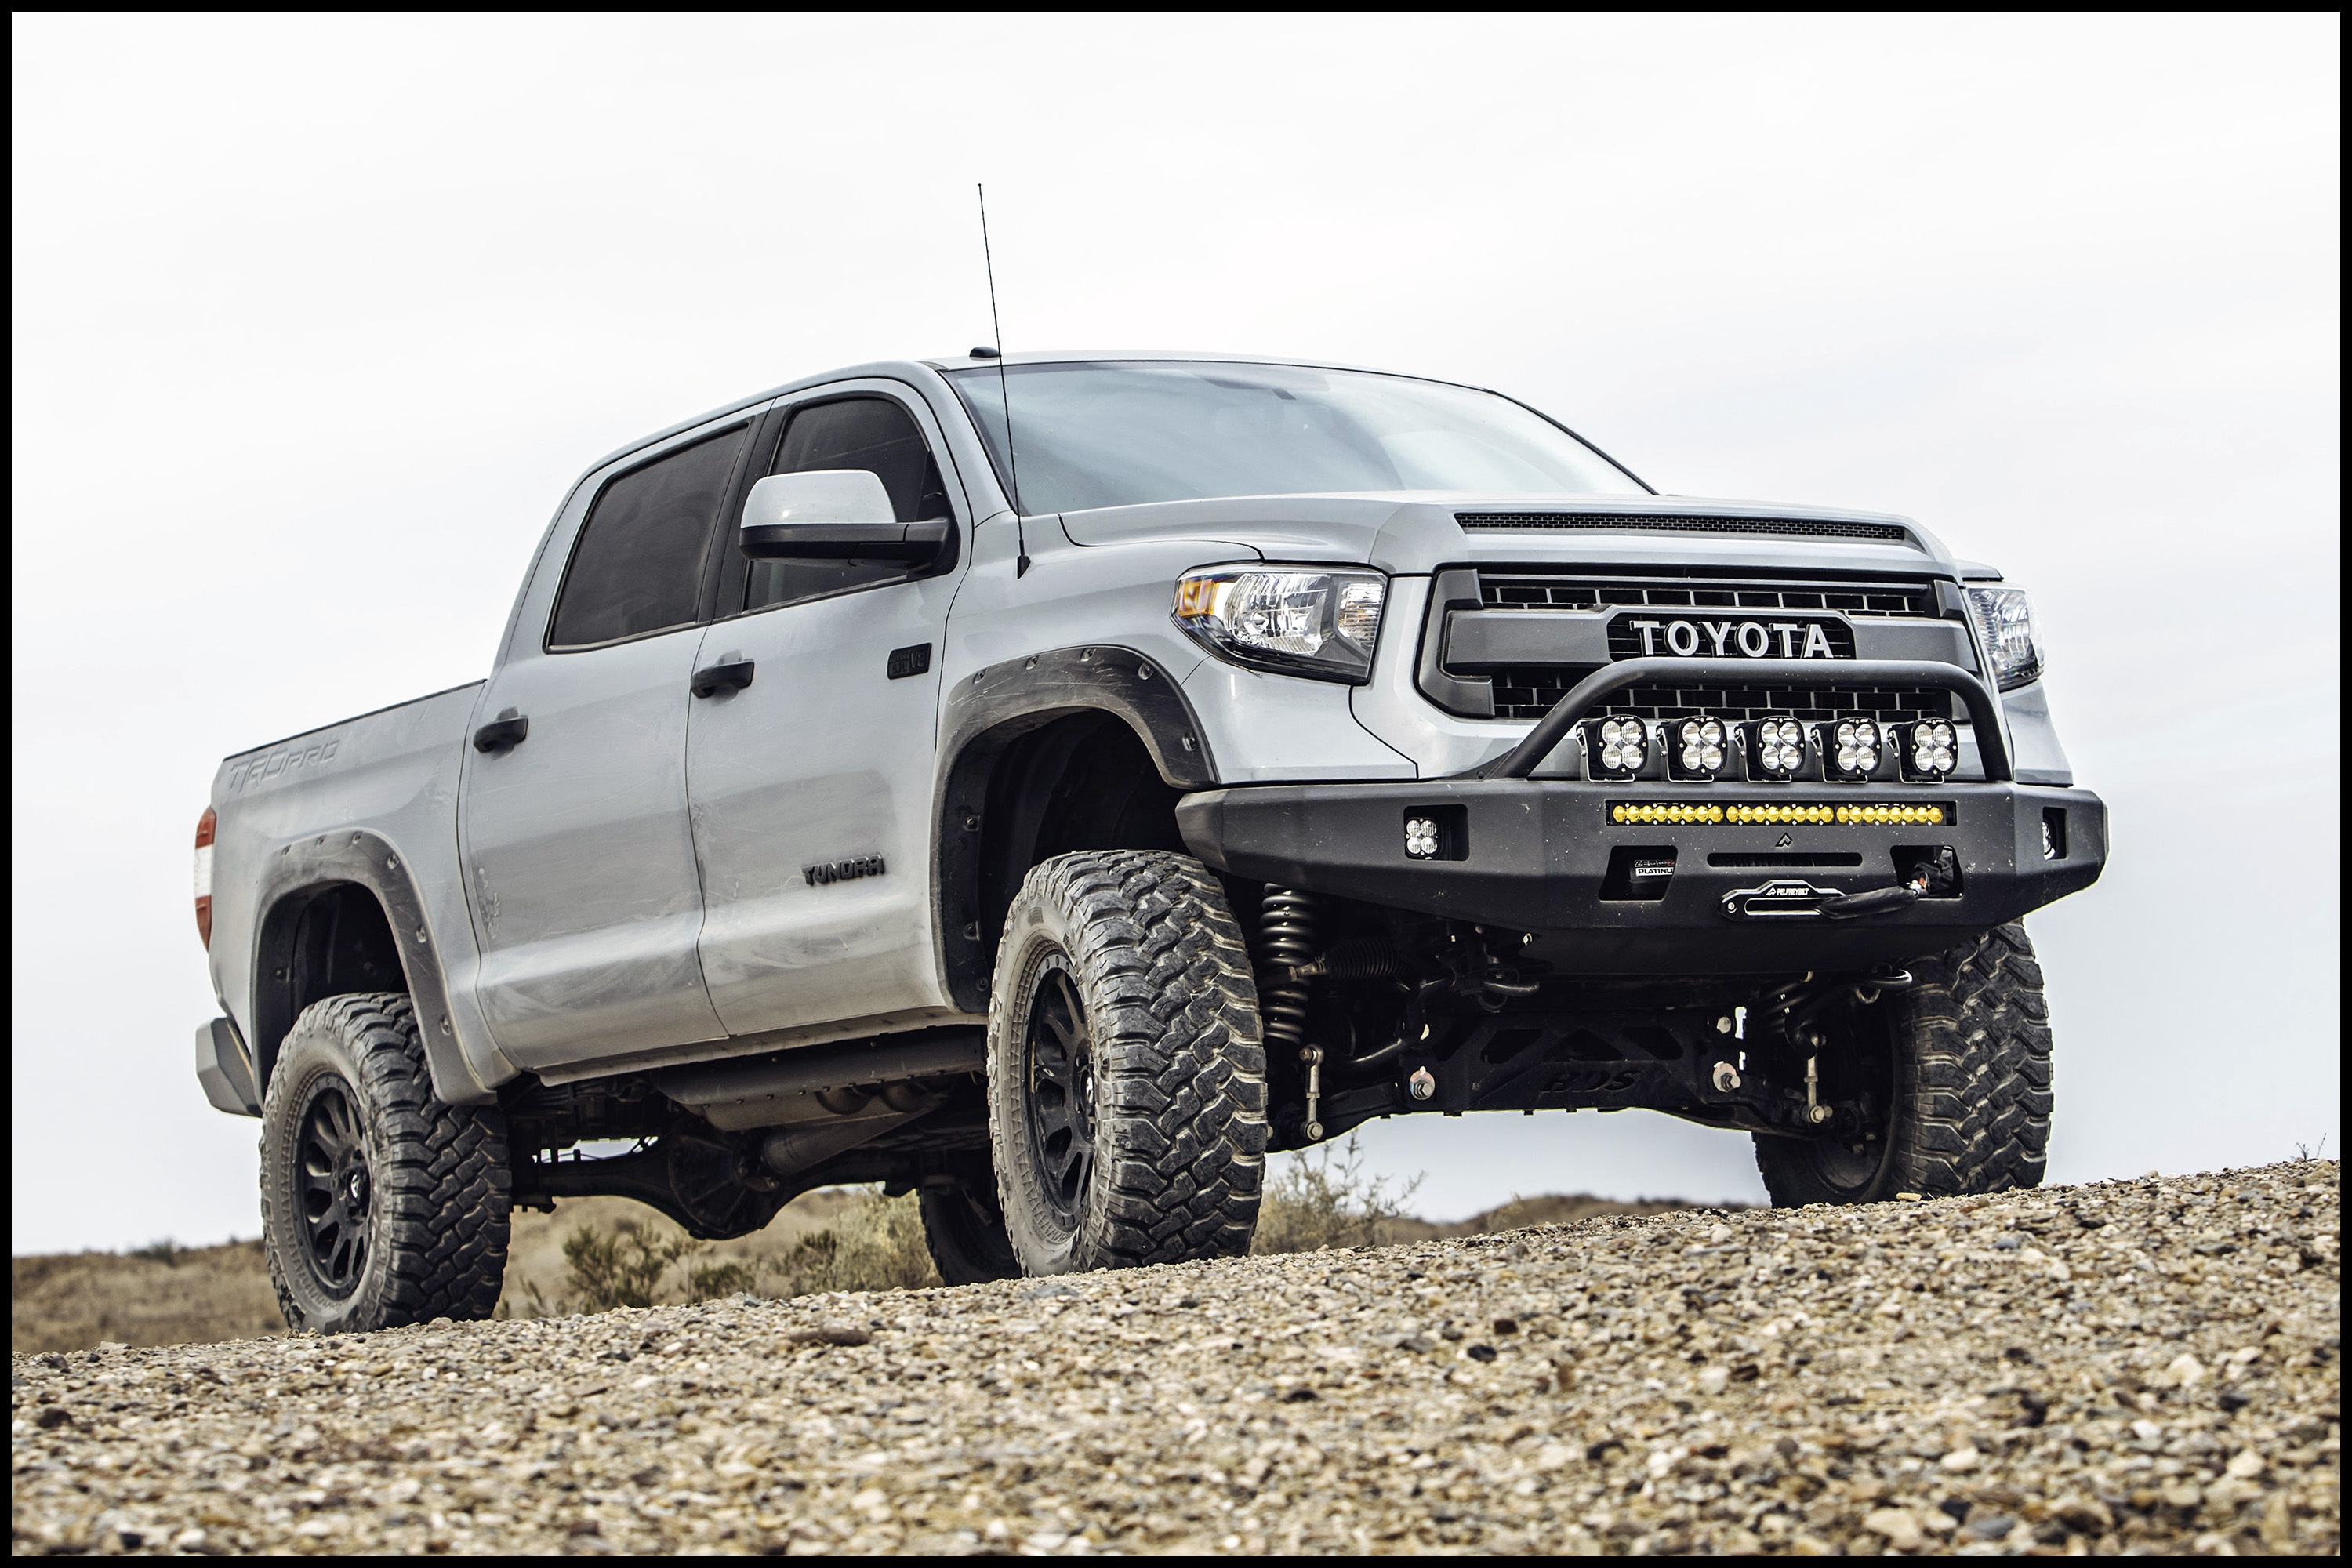 New 2016 toyota Tundra Lift Kits by Bds Suspension Review and Specs